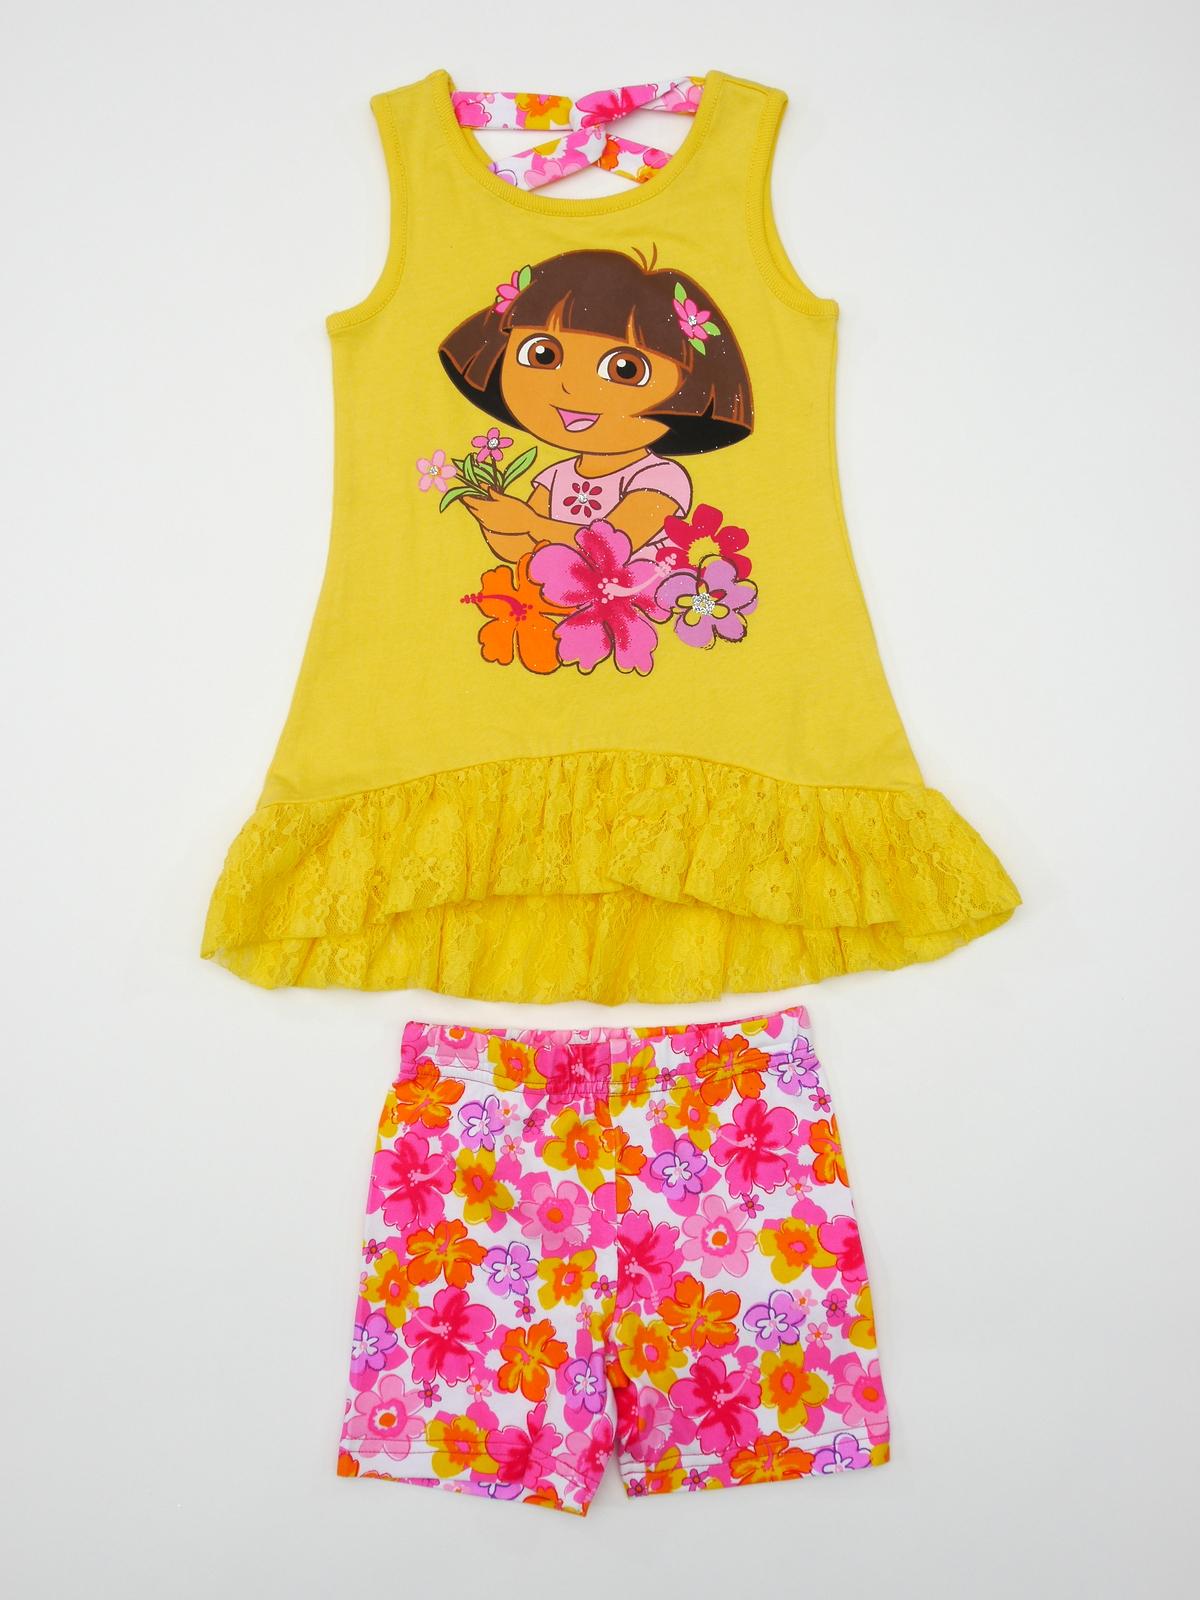 Nickelodeon Dora The Explorer Infant & Toddler Girl's Tunic Top & Shorts - Floral